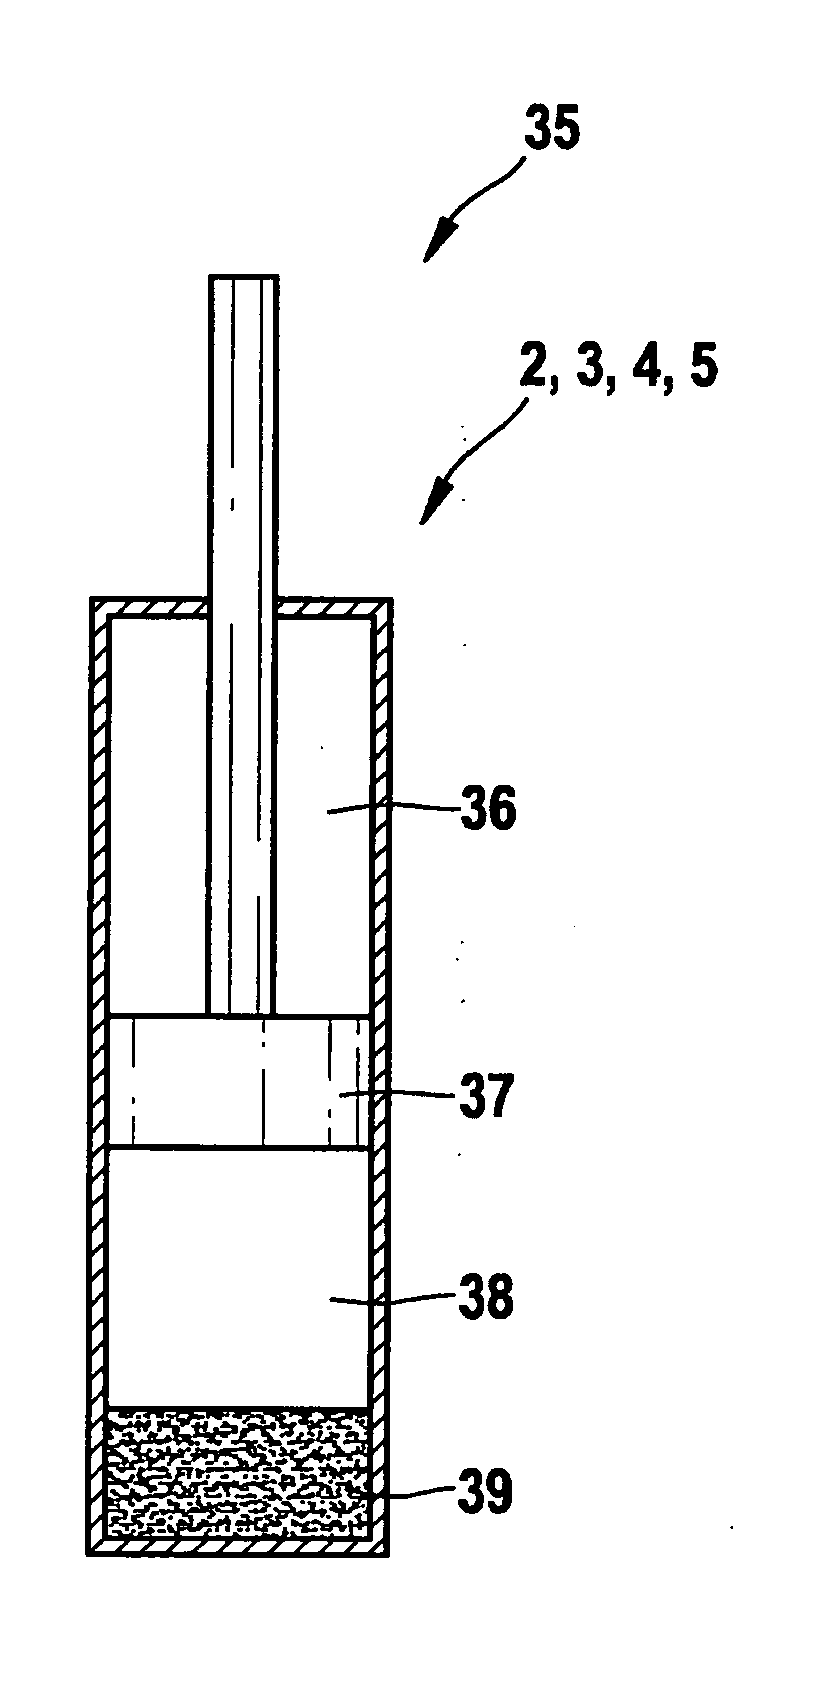 Method for Chassis Control of a Motor Vehicle, and Device for the Performance Thereof